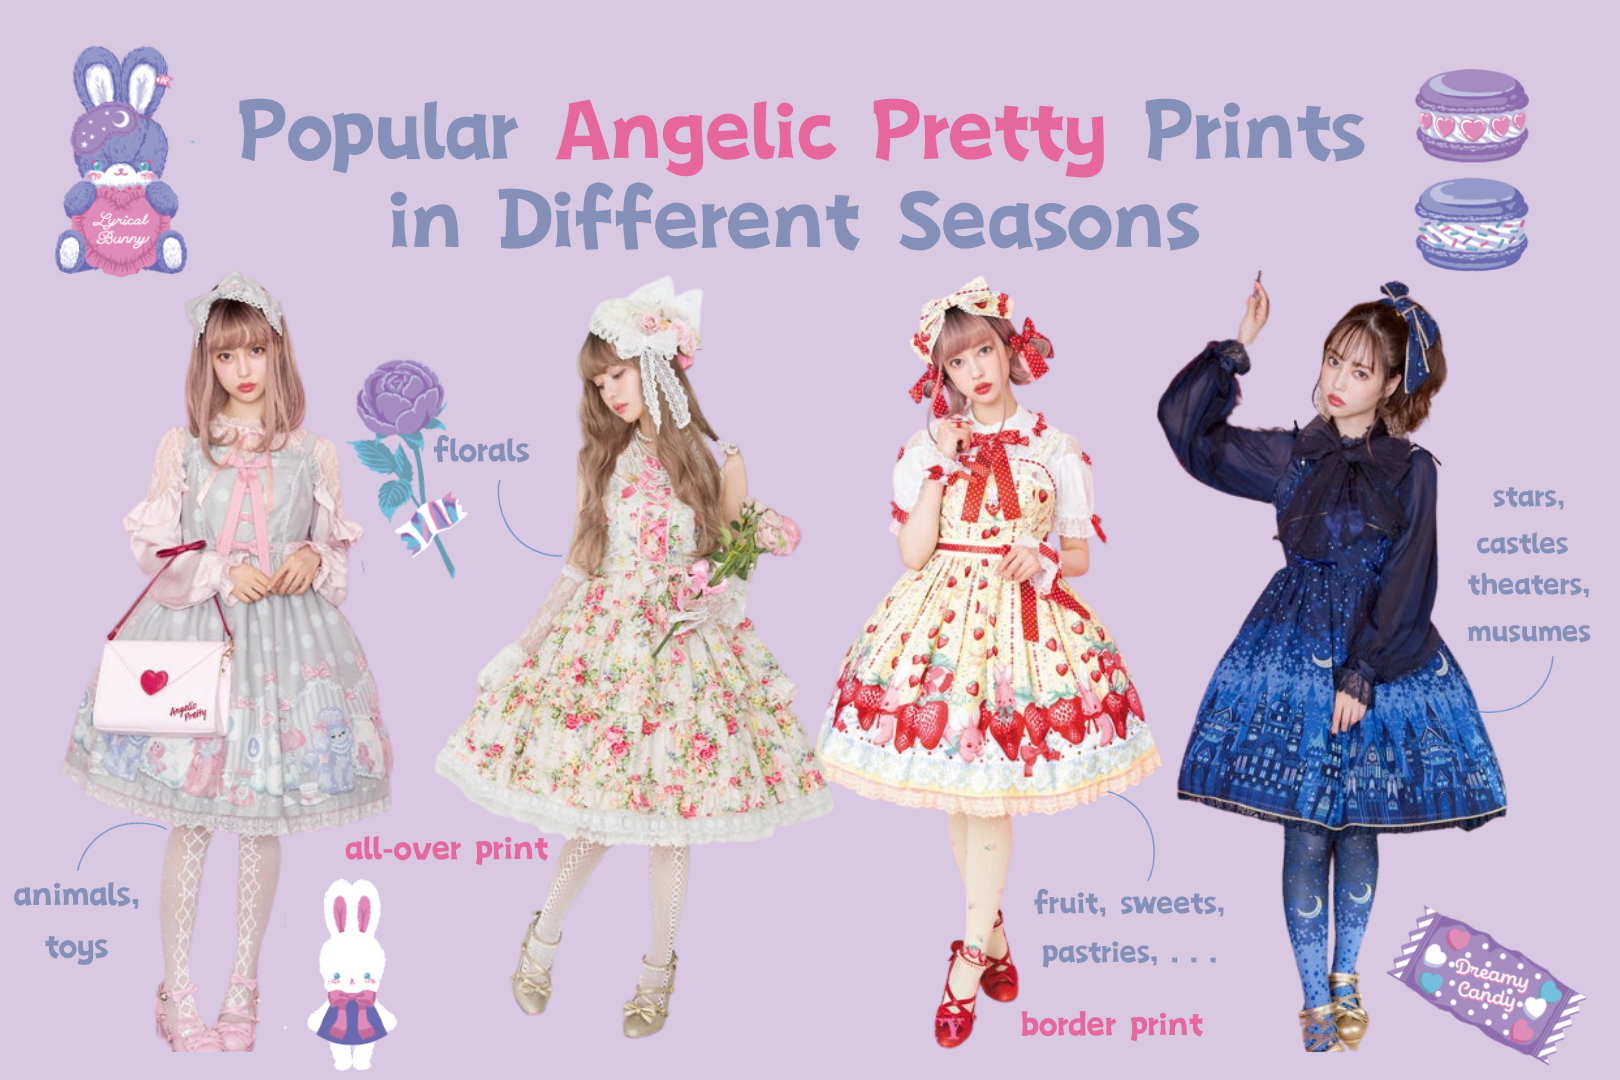 46 Most Popular Angelic Pretty Prints in Different Seasons